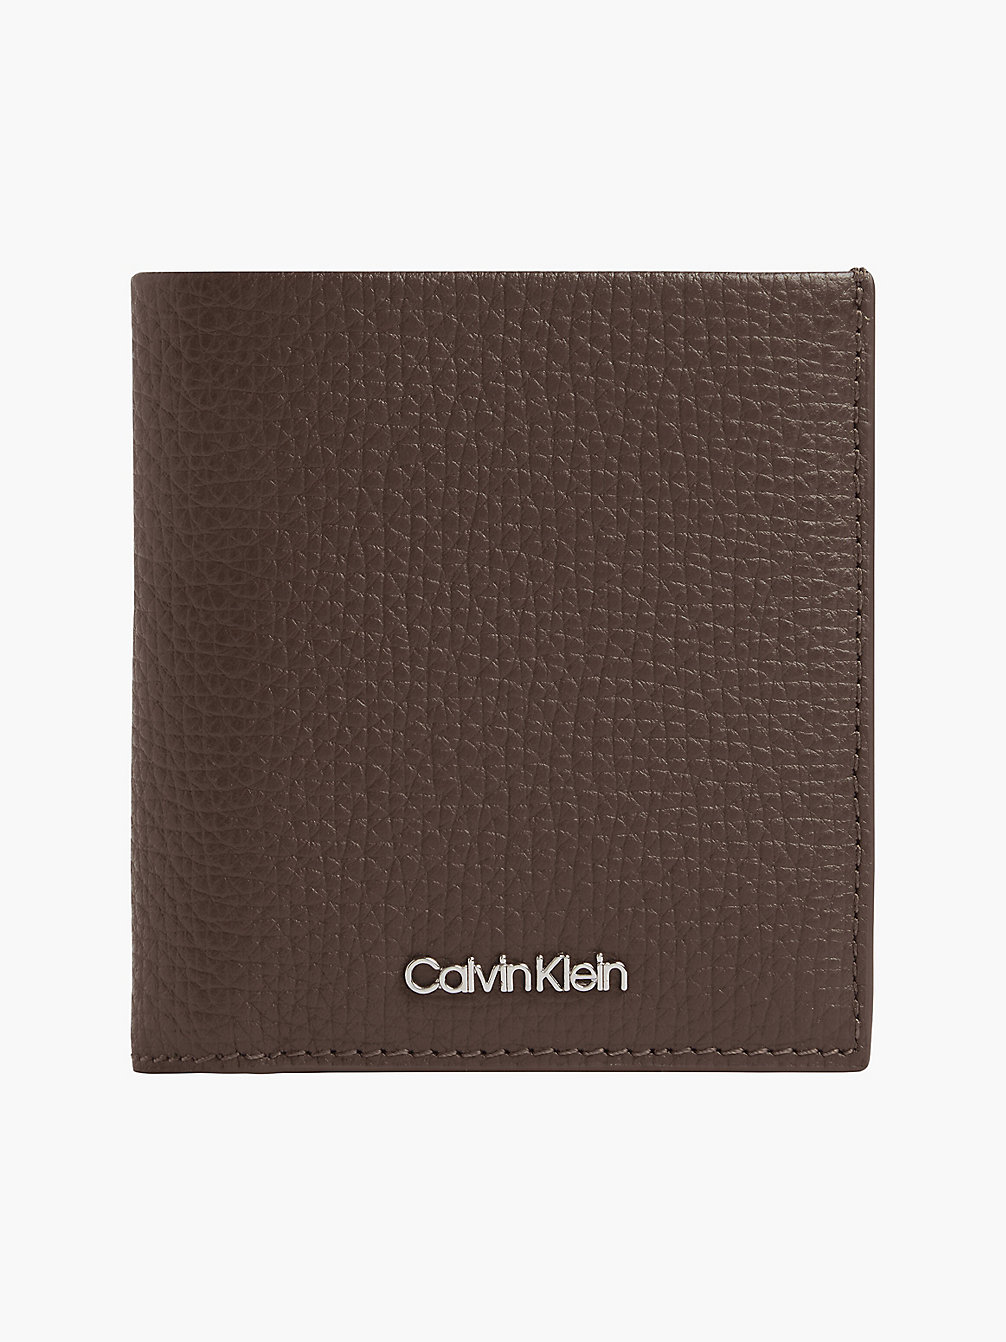 CHESTER BROWN Leather Trifold Wallet undefined men Calvin Klein